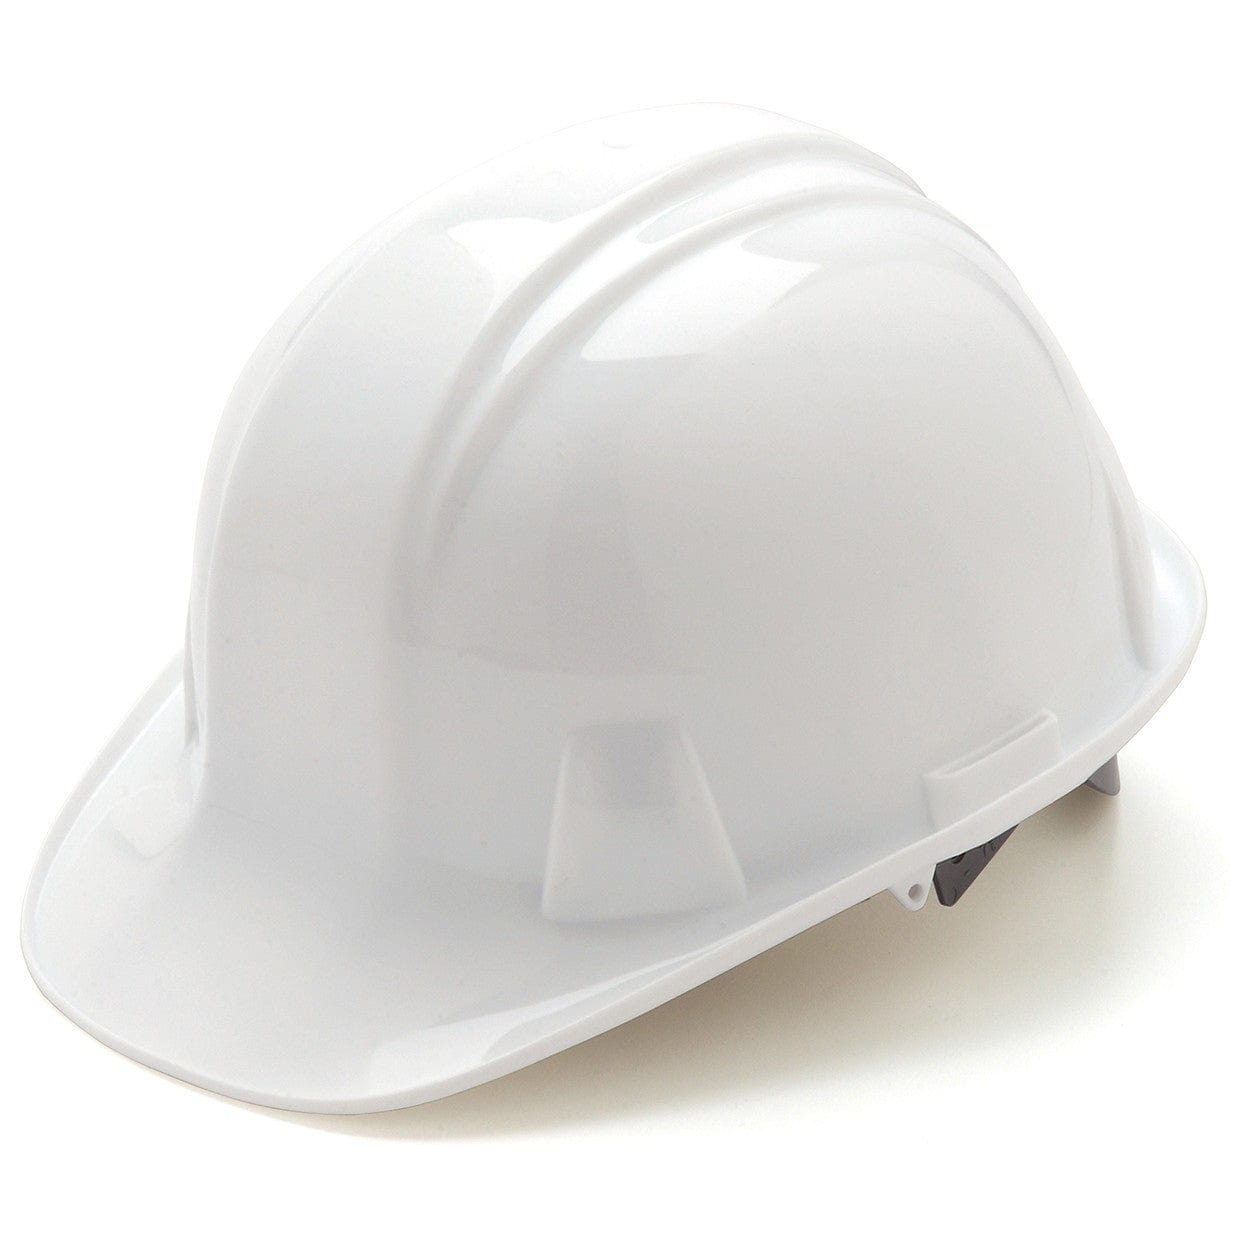 Pyramex Cap Style Hard Hat with 4-Point Ratchet Suspension Front